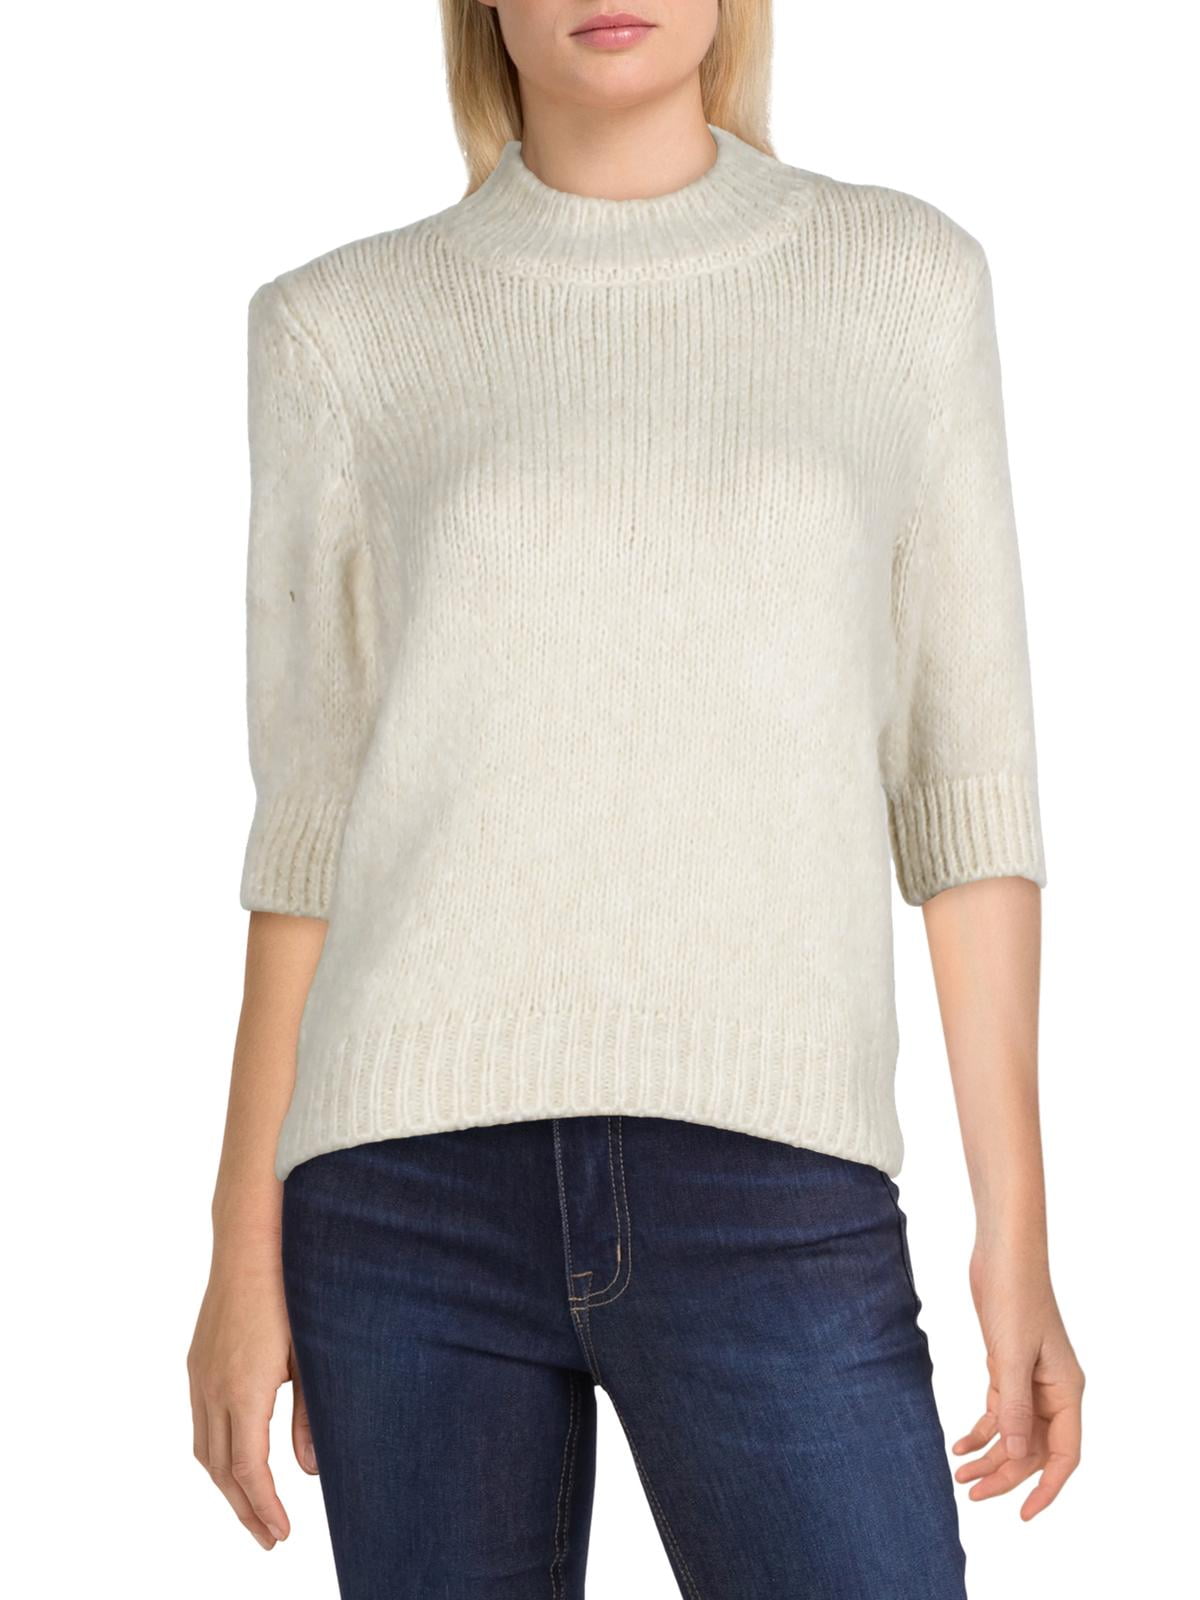 Vero Moda Women's Marled Knit Neck Pullover Sweater with Puff Sleeves Walmart.com